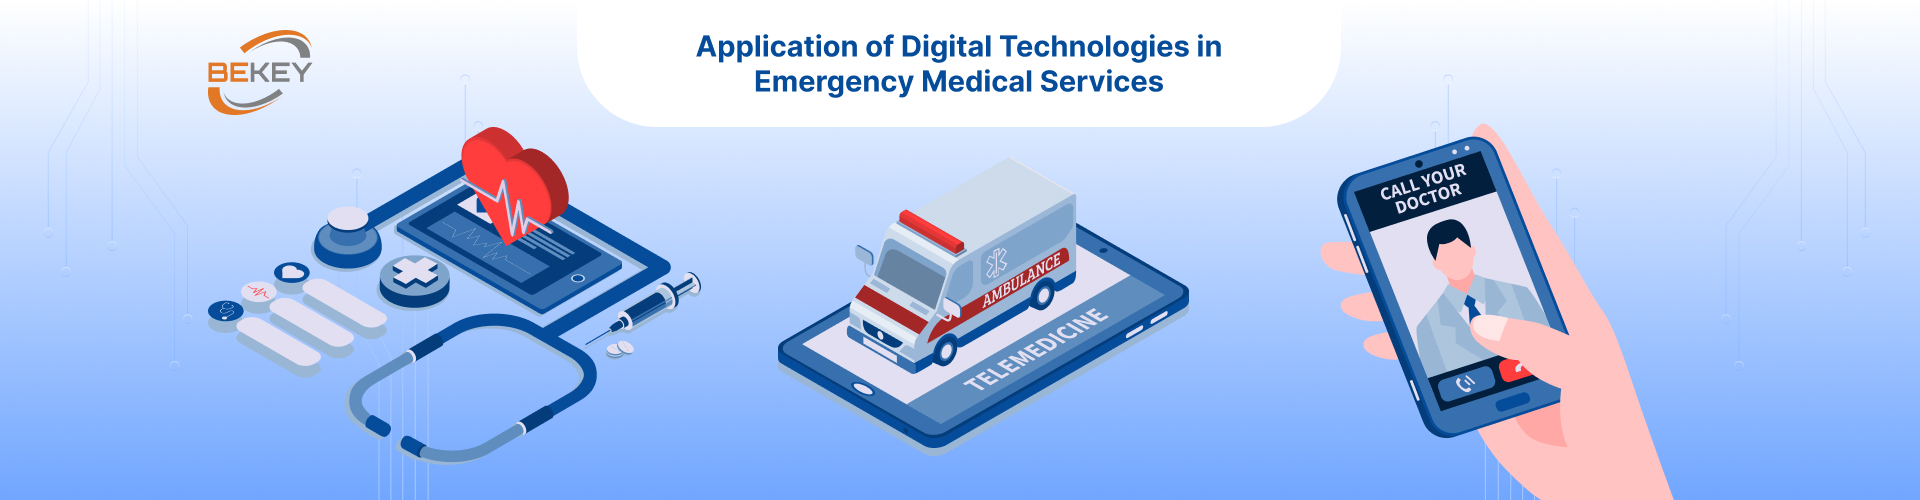 Application of digital technologies in emergency medical services